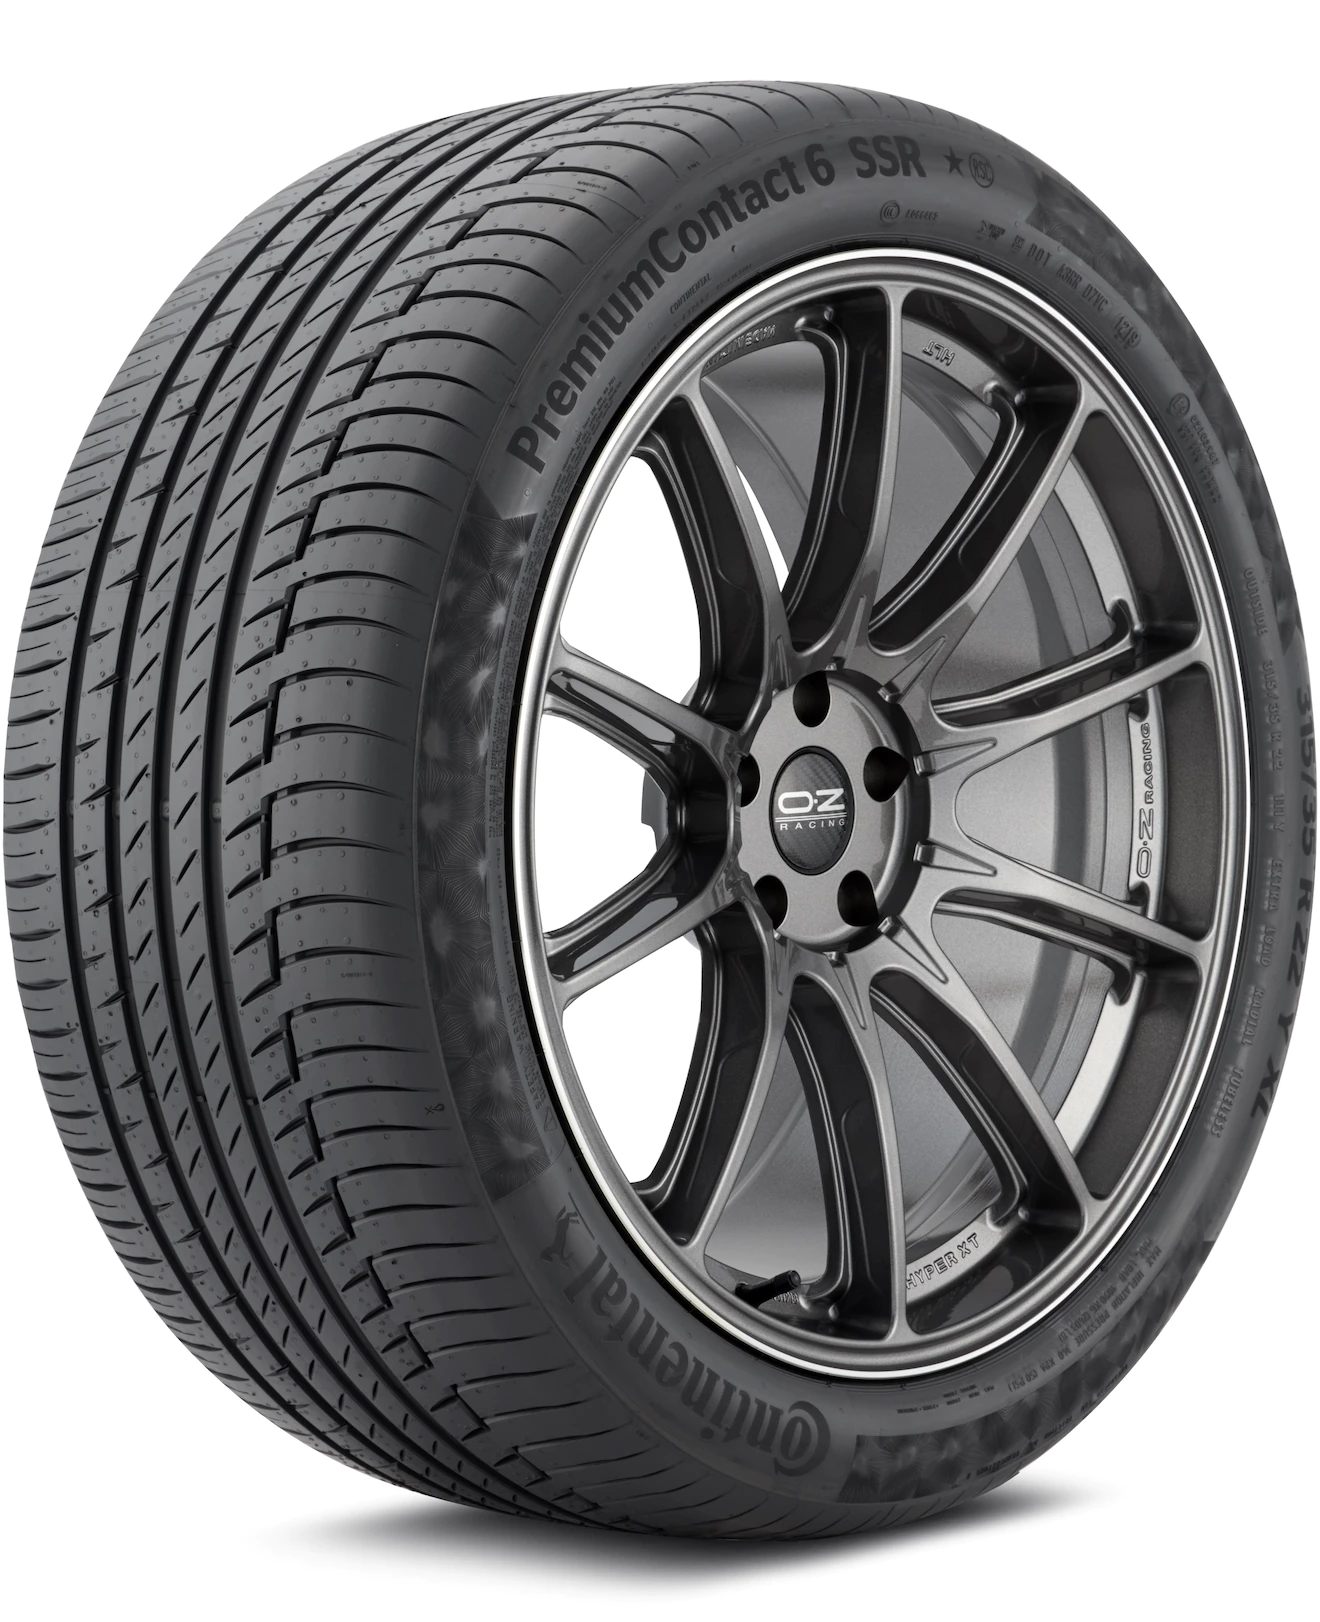 Continental PremiumContact 6 245/40 R20 99Y XL RunFlat FP